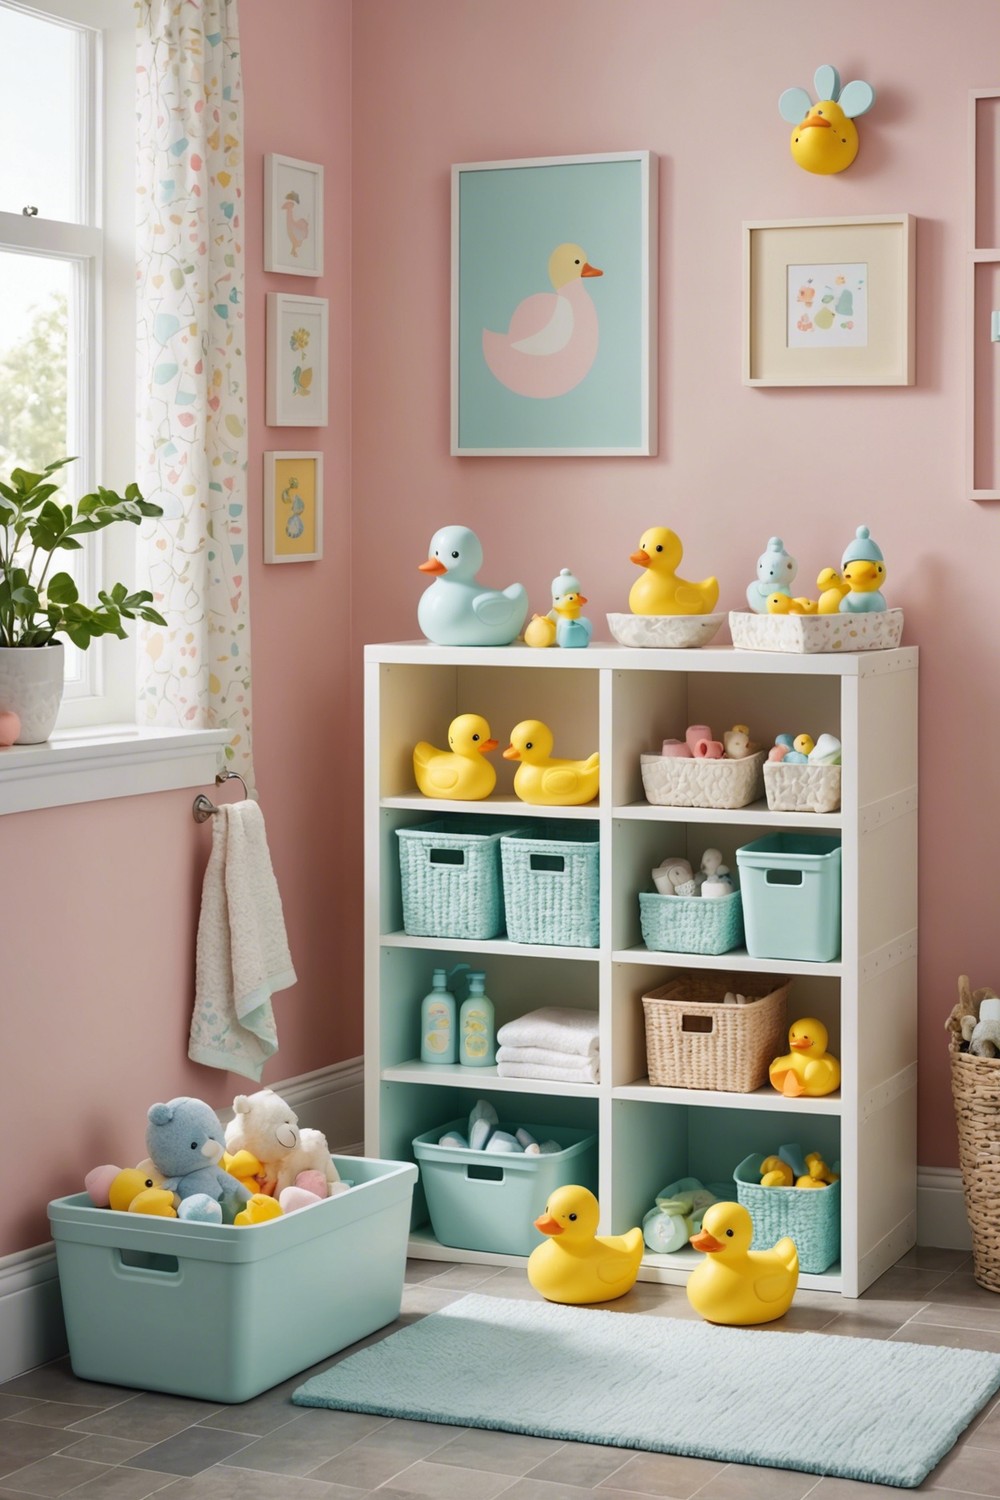 Baby Blocks and Toy-Themed Decor